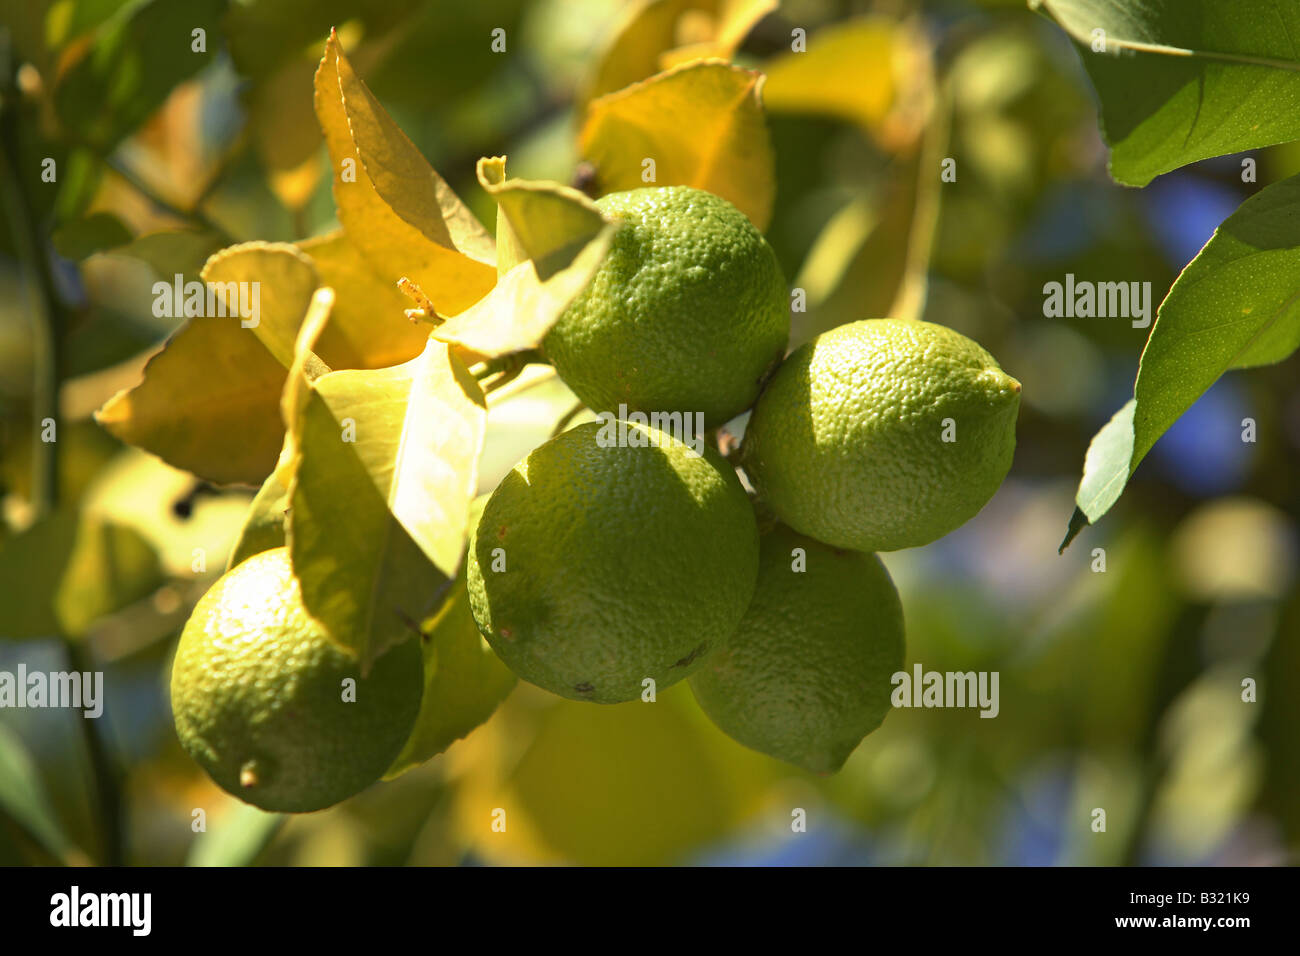 Green lemons hanging from a tree Stock Photo